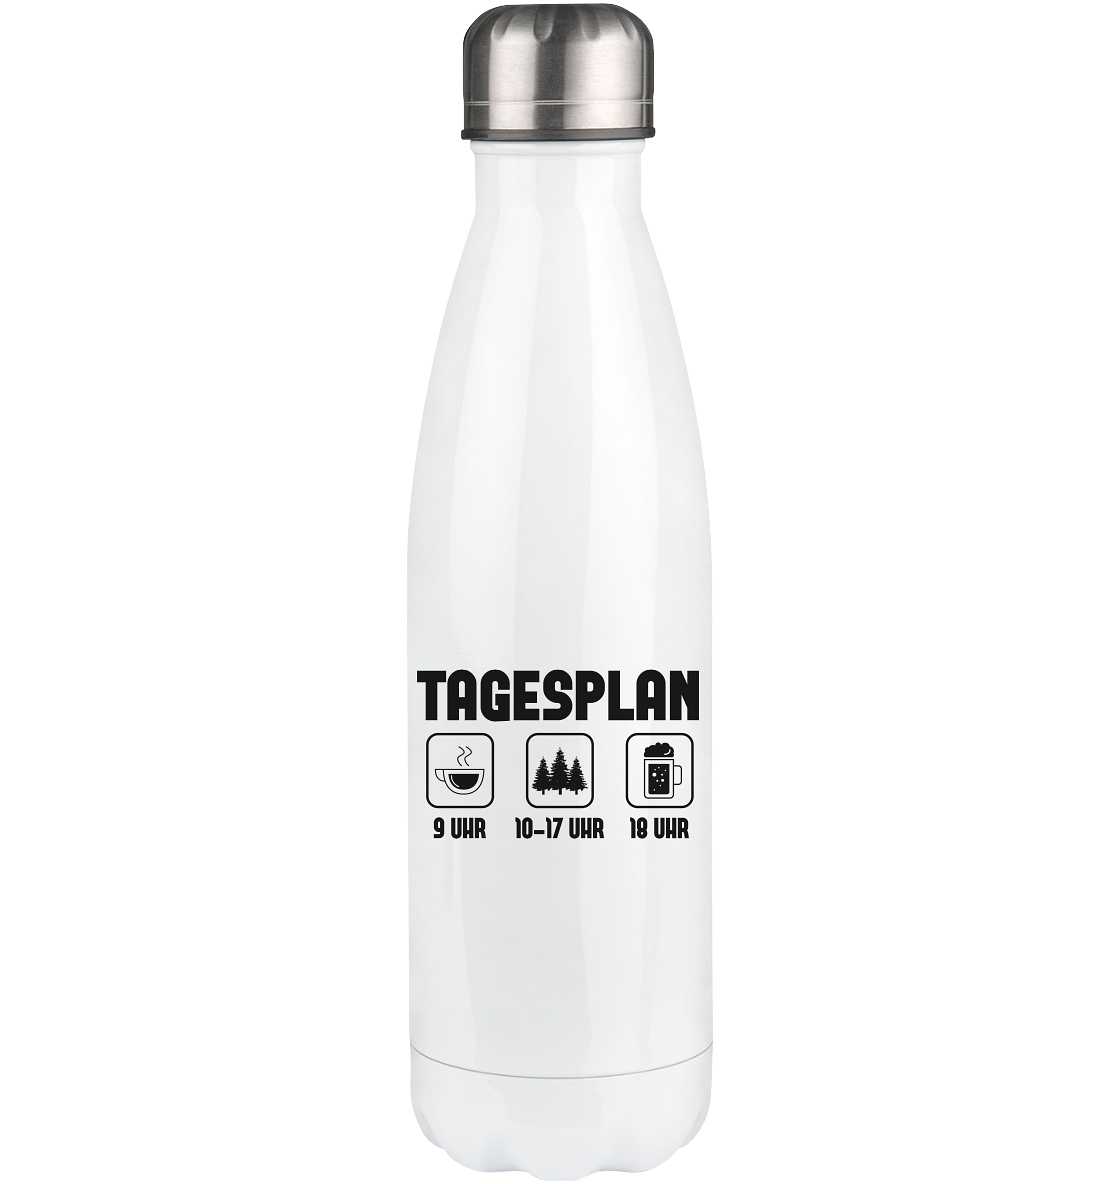 Tagesplan 3 - Edelstahl Thermosflasche camping UONP 500ml